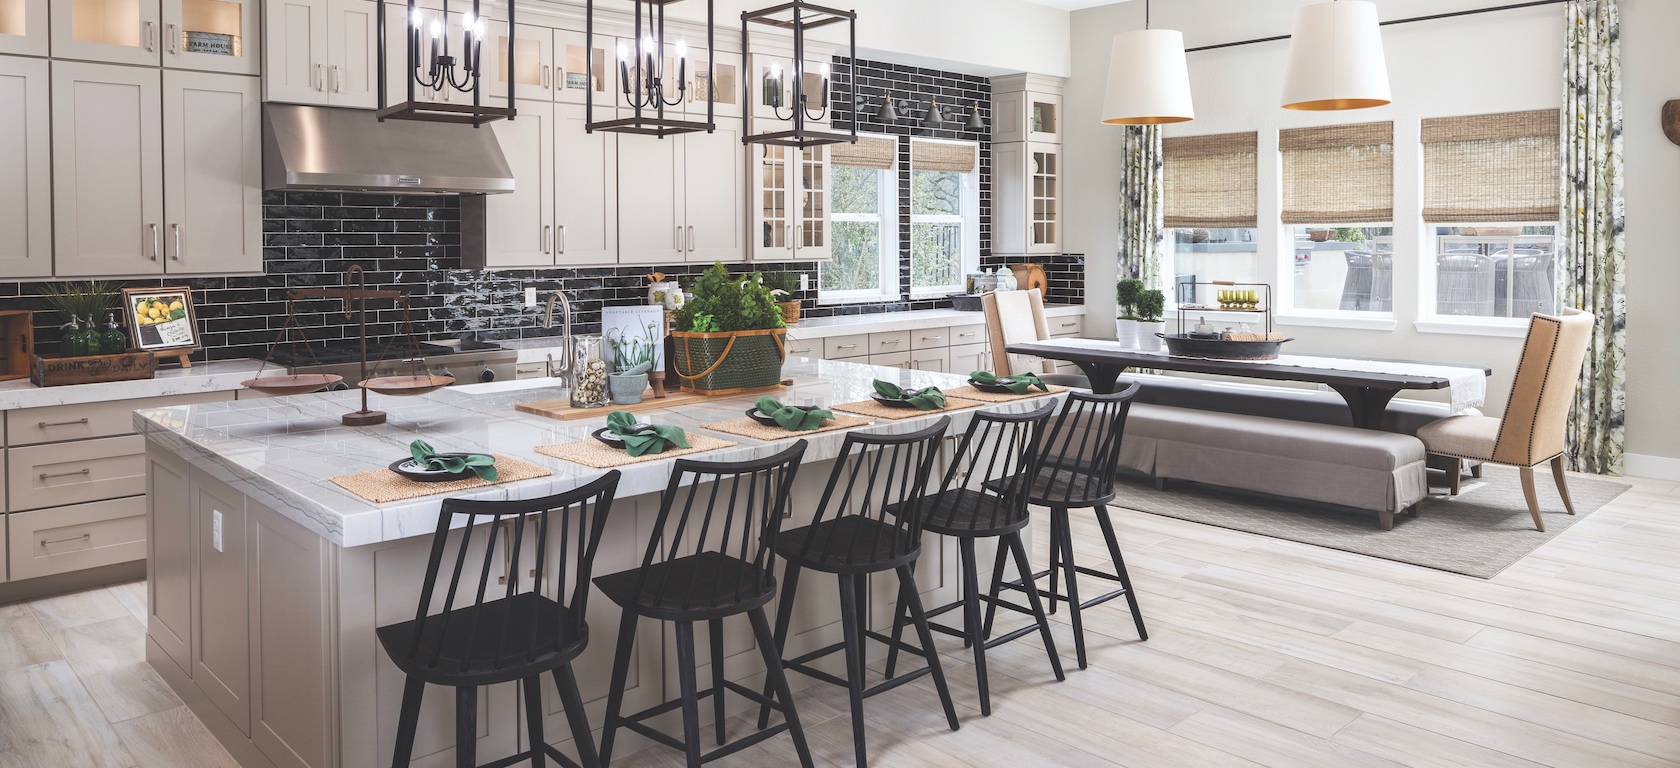 18 breakfast nook ideas to complete your kitchen | build beautiful